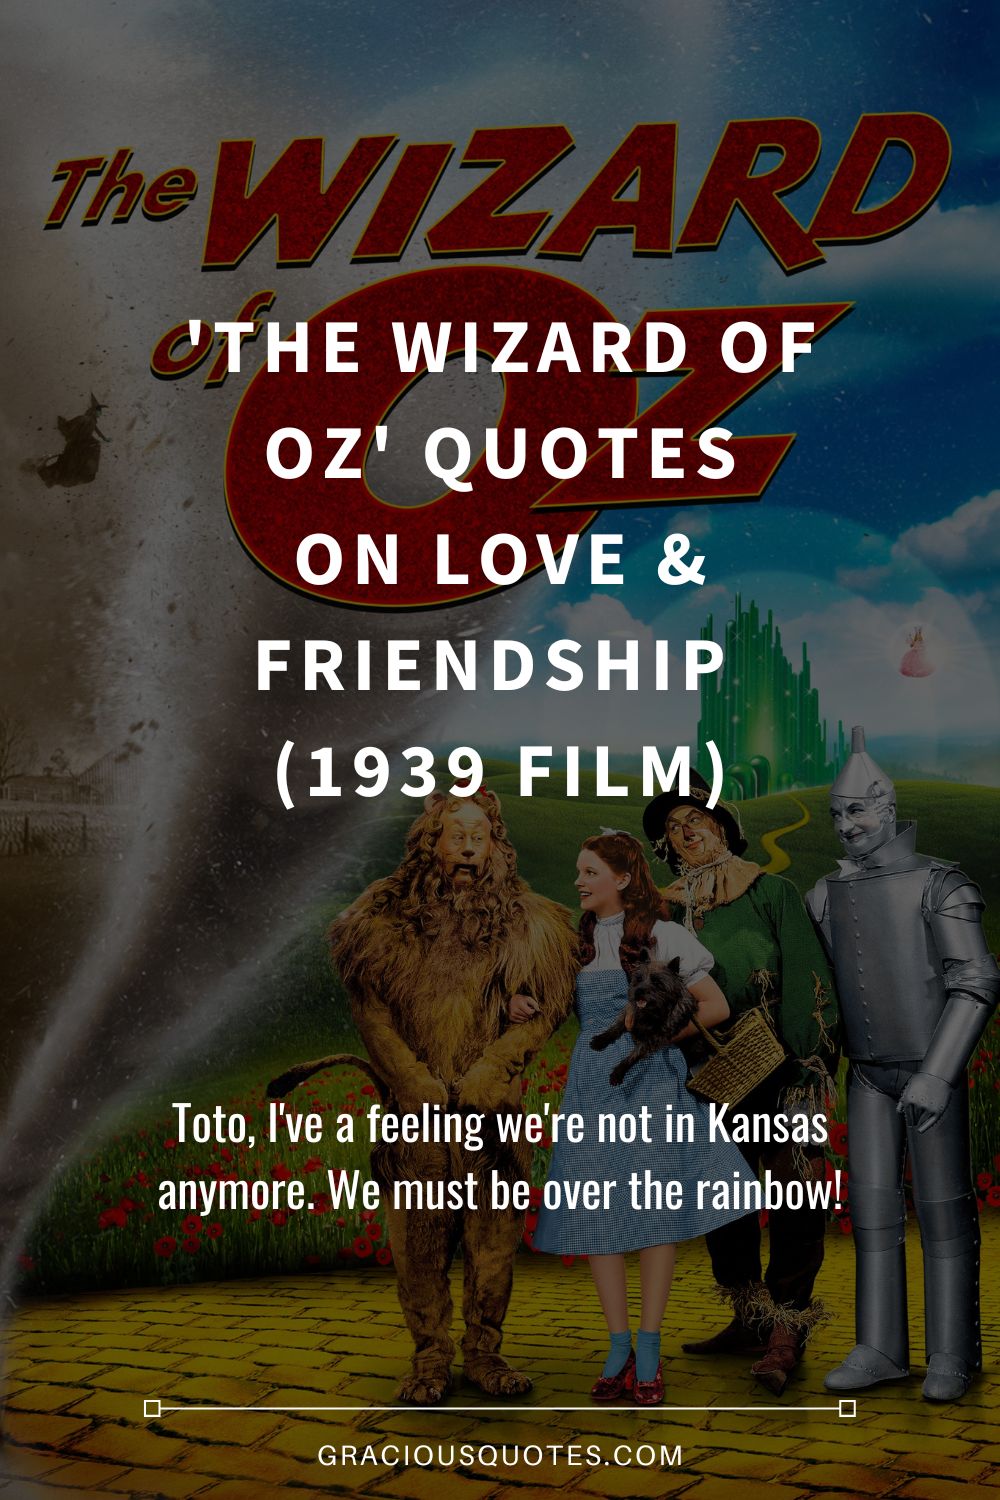 'The Wizard of Oz' Quotes on Love & Friendship (1939 FILM) - Gracious Quotes